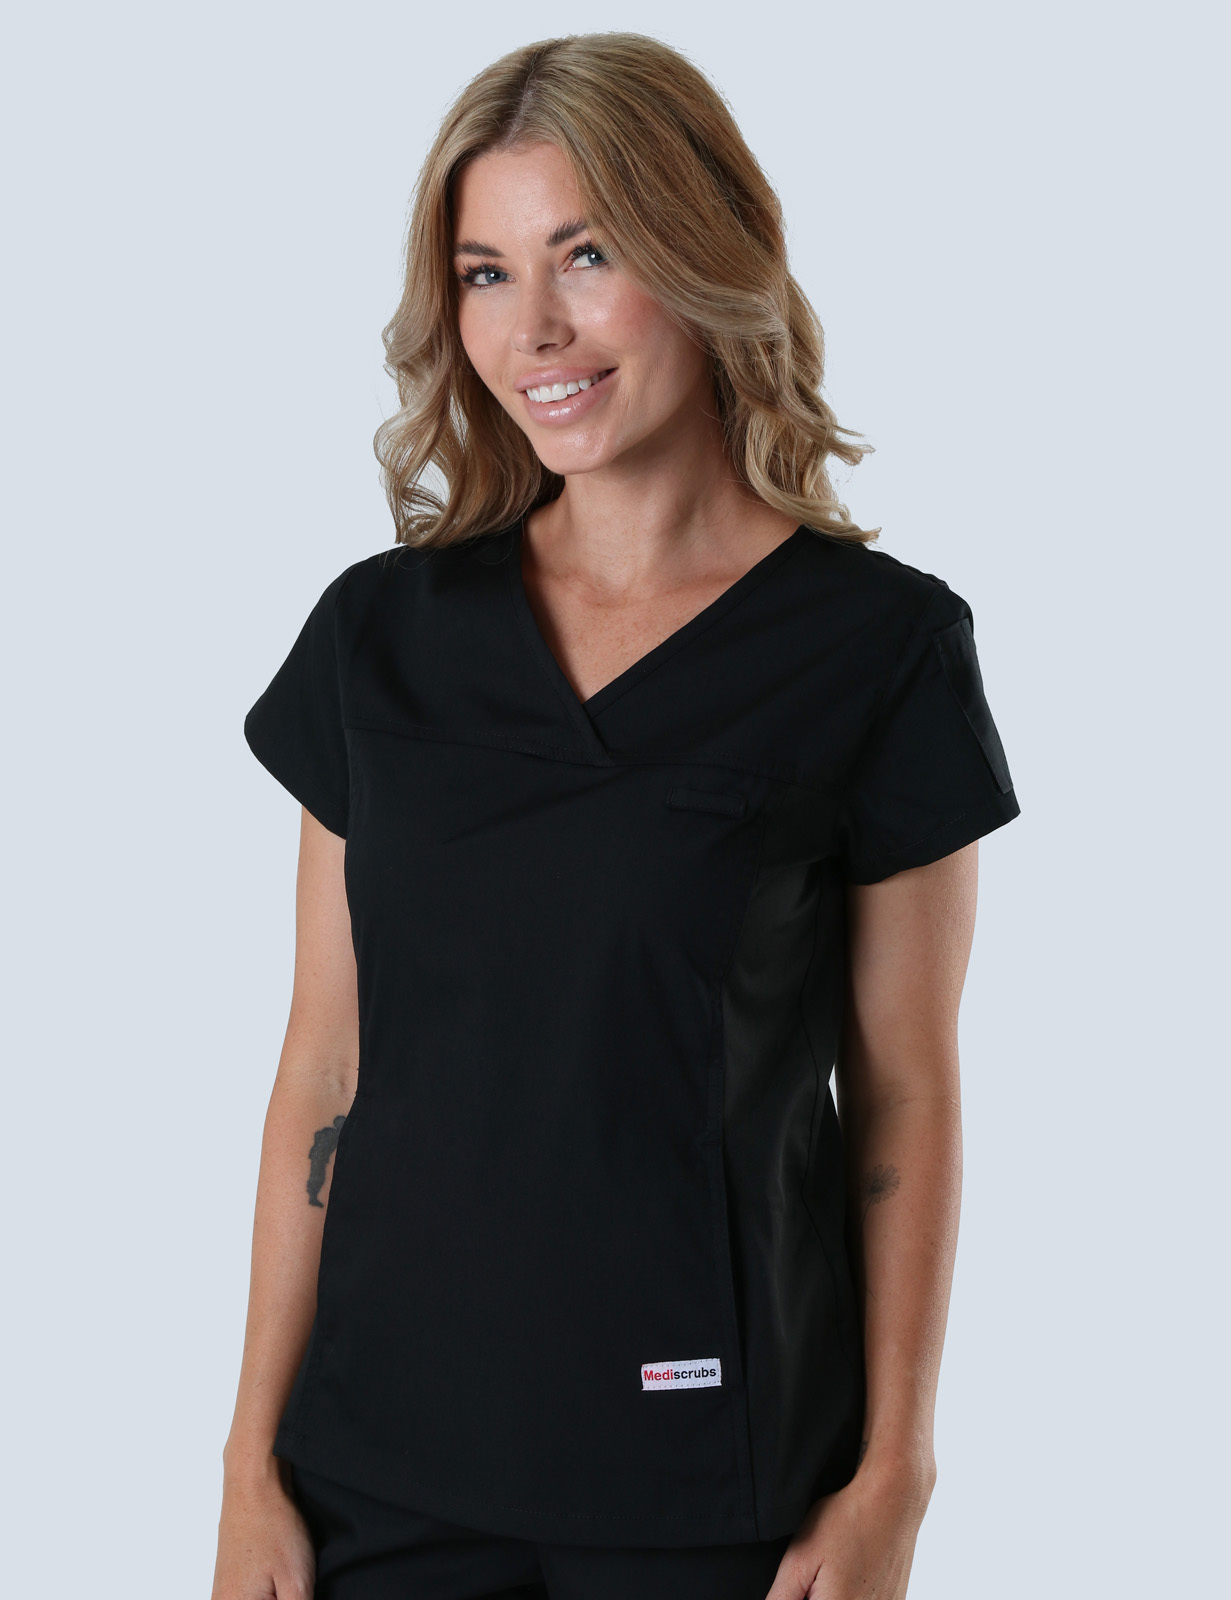 Women's Fit Solid Scrub Top With Spandex Panel - Black - X Large